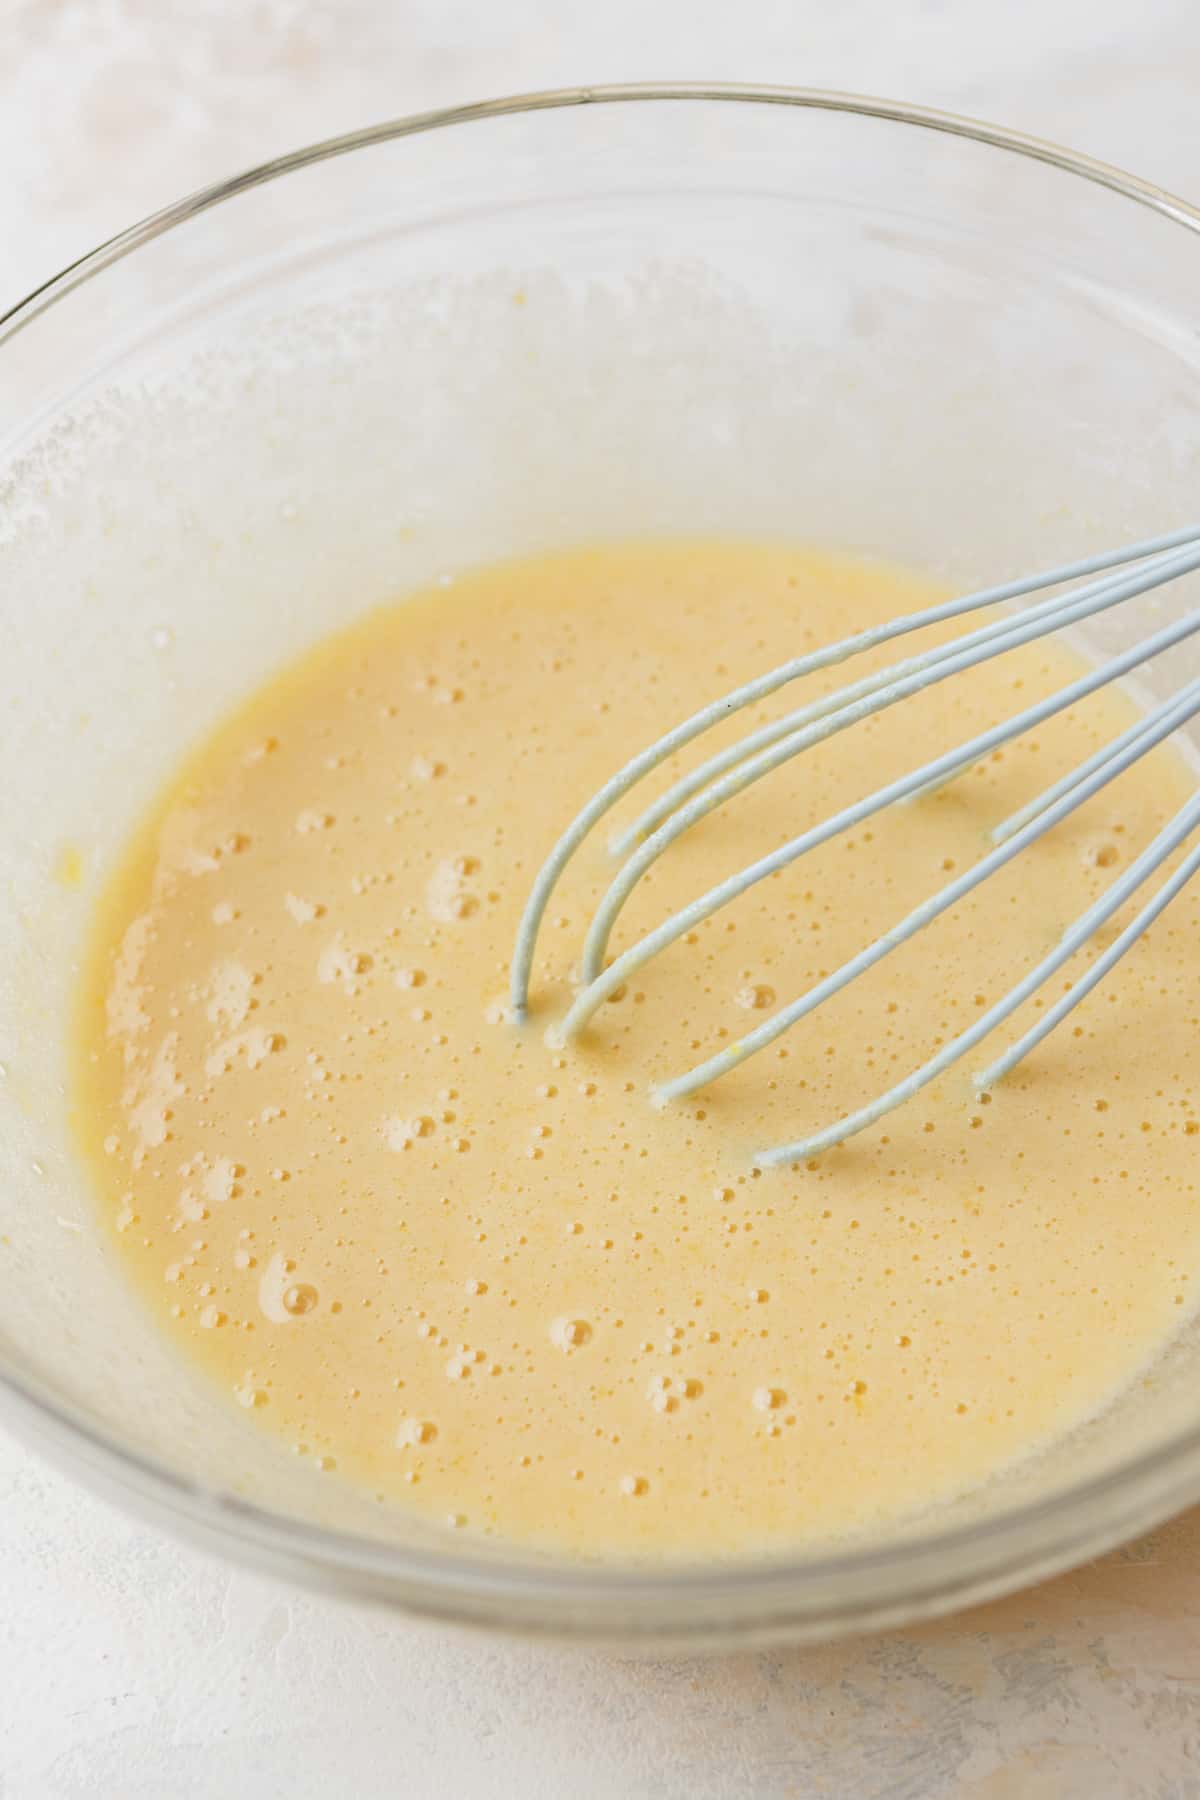 Eggs and sugar whisked together in a glass bowl.